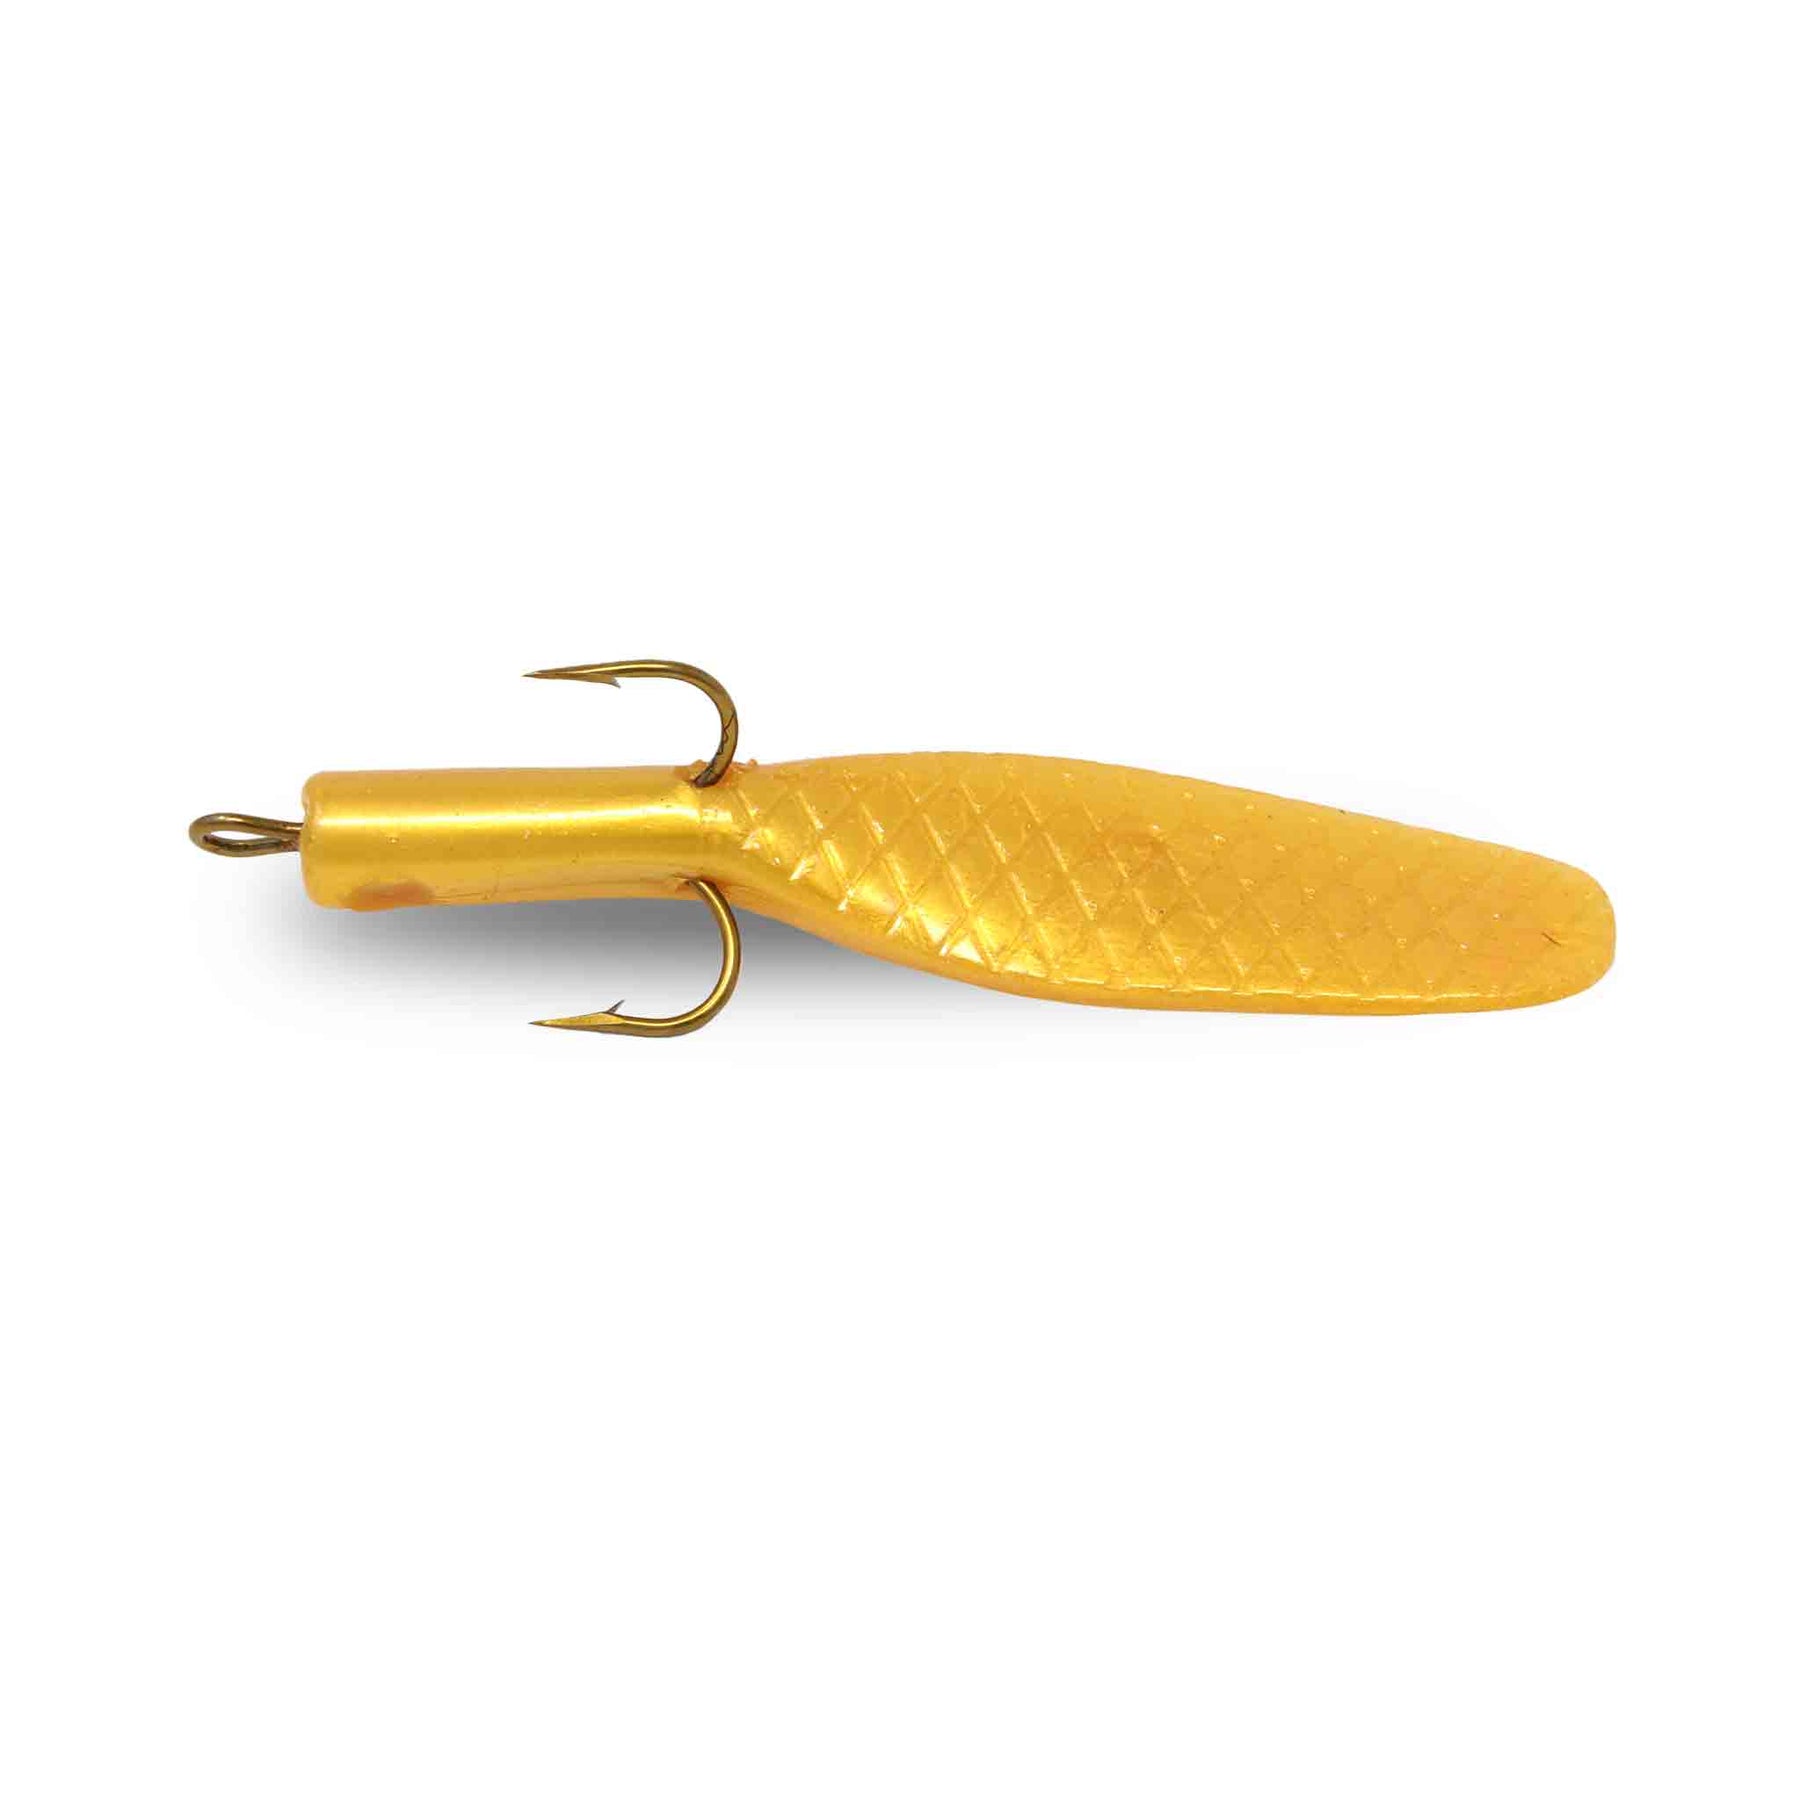 Beaver's Baits Baby Beaver XL Tail Gold Replacement Tails